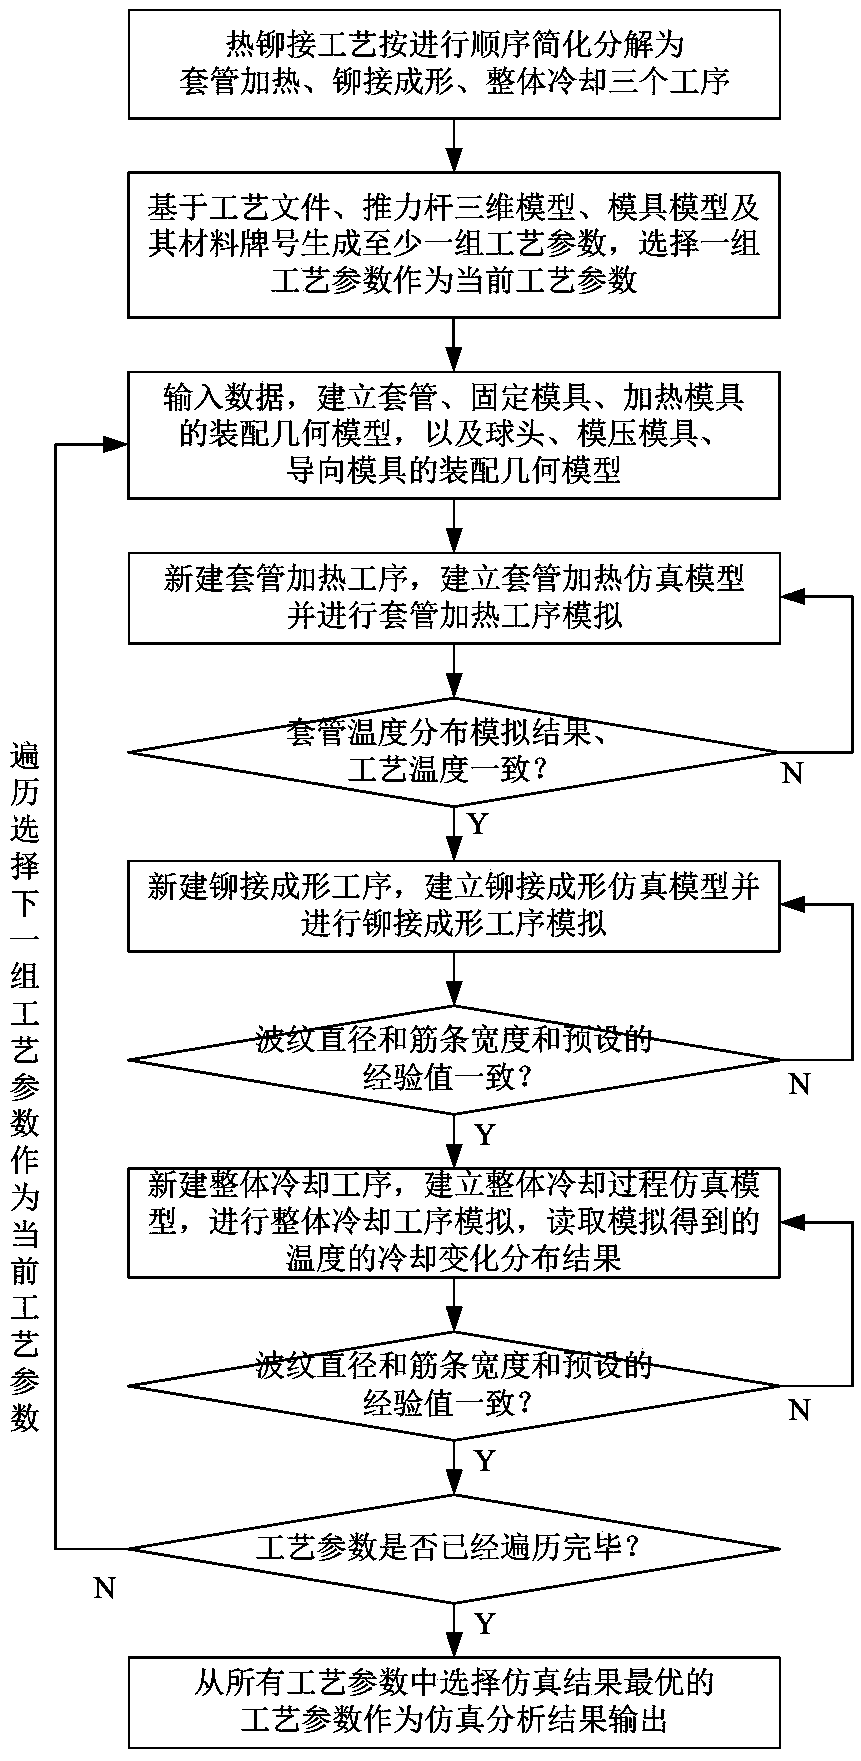 Simulative analysis method for hot riveting process of automobile thrust rod